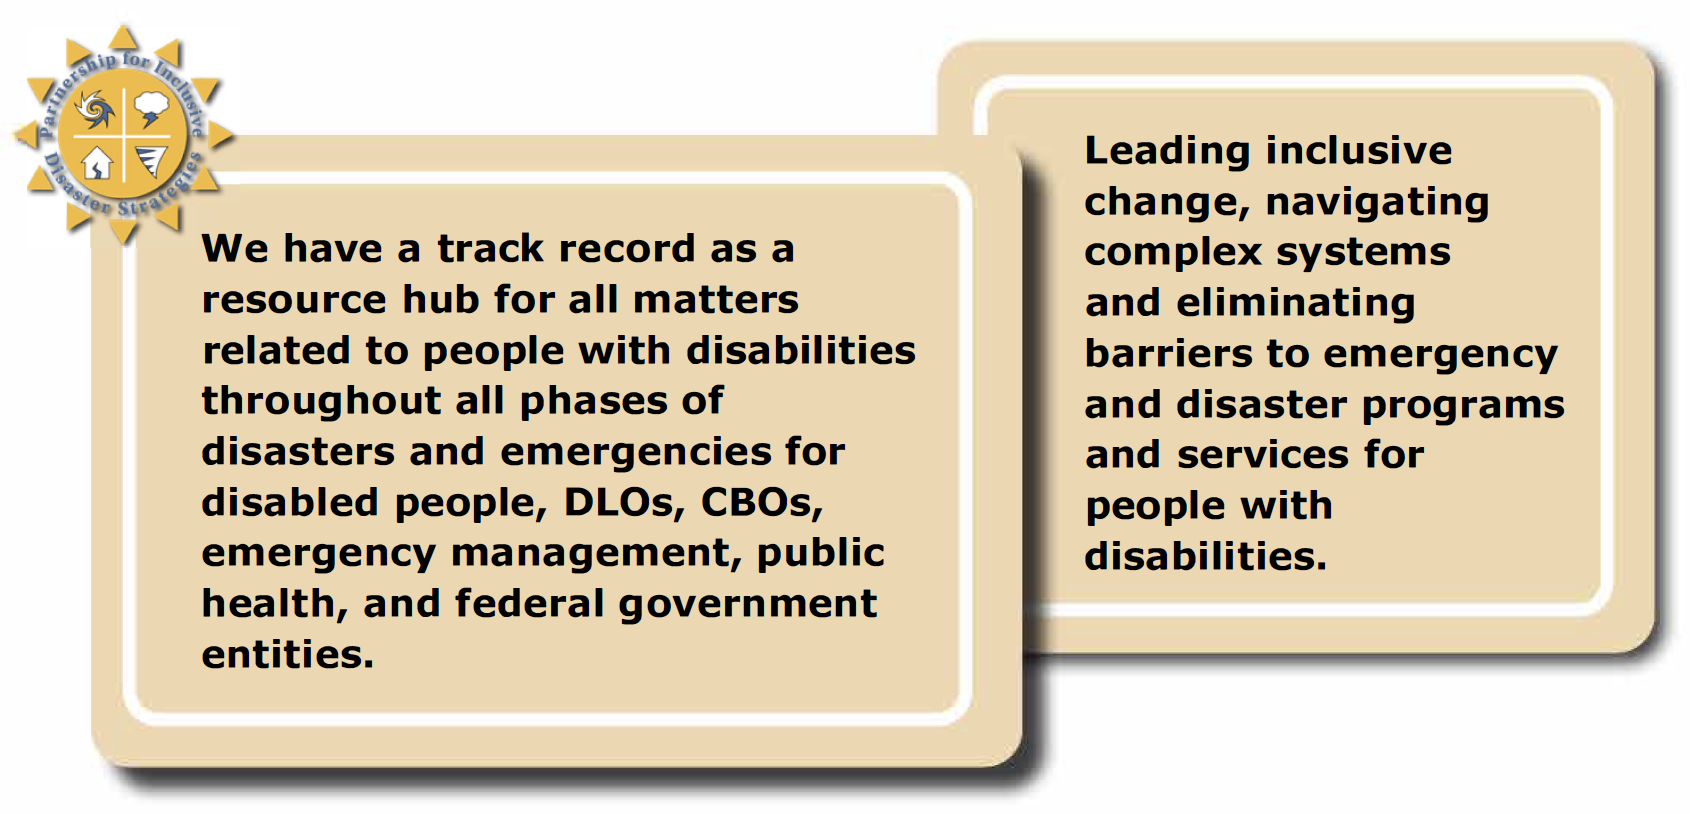 Two yellow highlight boxes with The Partnership's logo in the corner. Textbox 1: "We have a track record as a resource hub for all matters related to people with disabilities throughout all phases of disasters and emergencies for disabled people, DLOs, CBOs, emergency management, public health, and federal government entities." Textbox 2: "Leading inclusive change, navigating complex systems and eliminating barriers to emergency and disaster programs and services for people with disabilities."